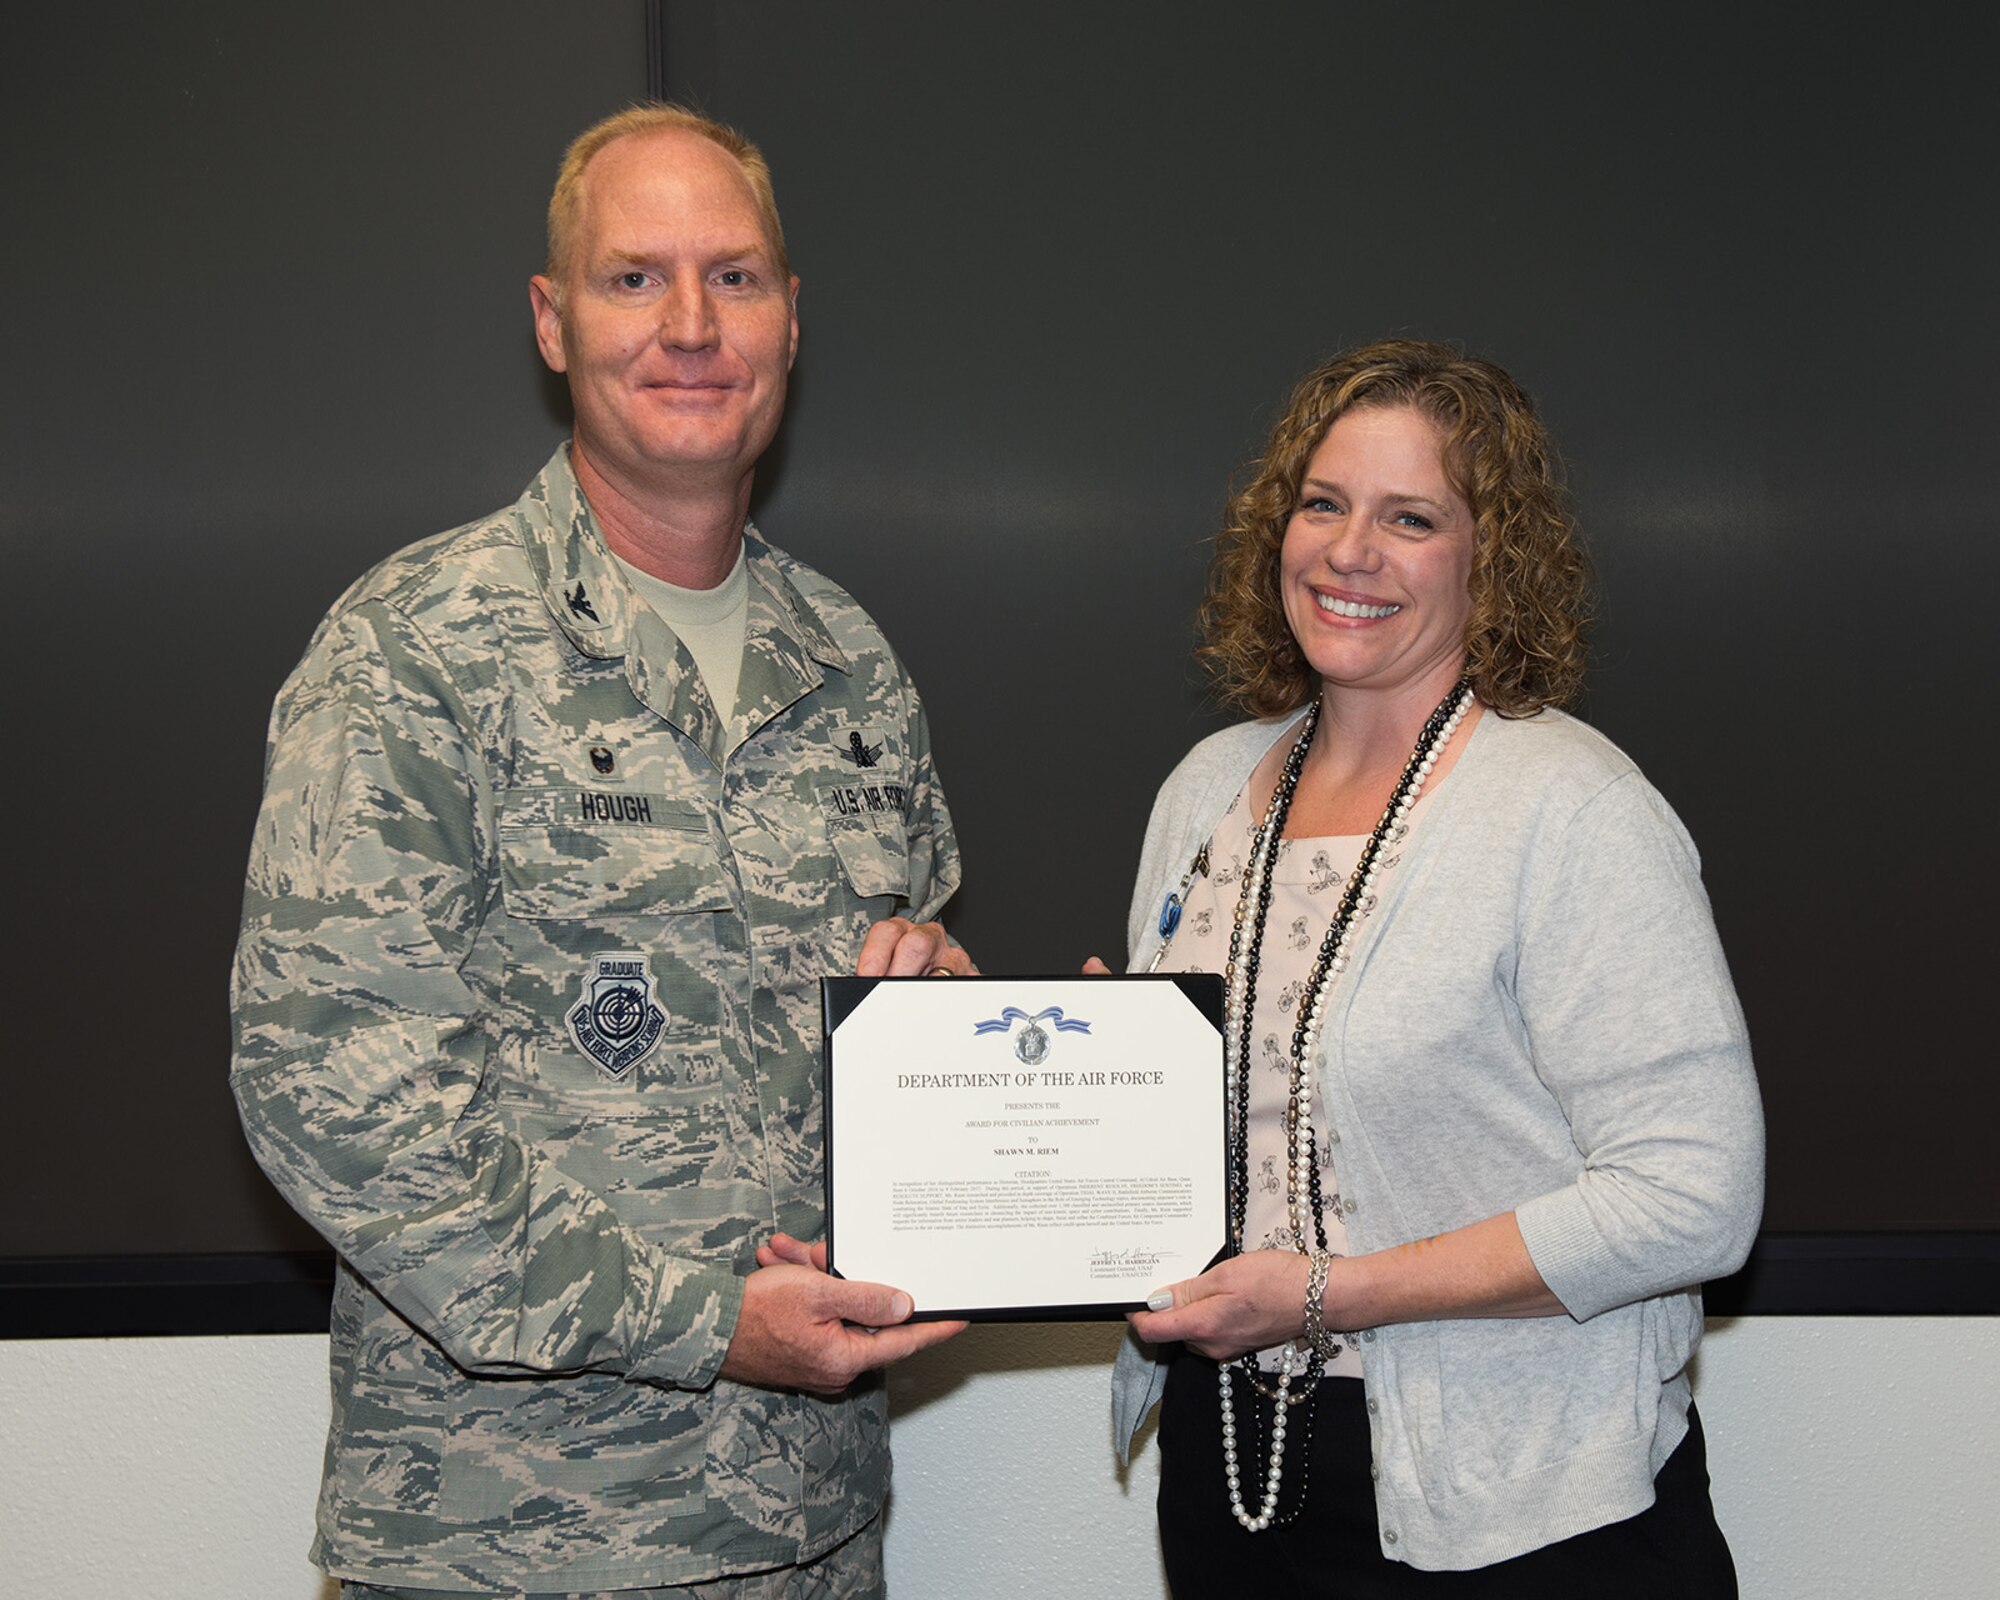 Col. Michael Hough, 30th Space Wing commander, presents Ms. Shawn Riem, 30th SW historian, with a civilian achievement award, July 12, 2017, Vandenberg Air Force Base, Calif. Riem was recognized for her distinguished performance as historian for Headquarters United States Air Forces Central Command, Al Udeid Air Base, Qatar, from Oct 2016 - Feb 2017. (U.S. Air Force photo by Michael Peterson/released)